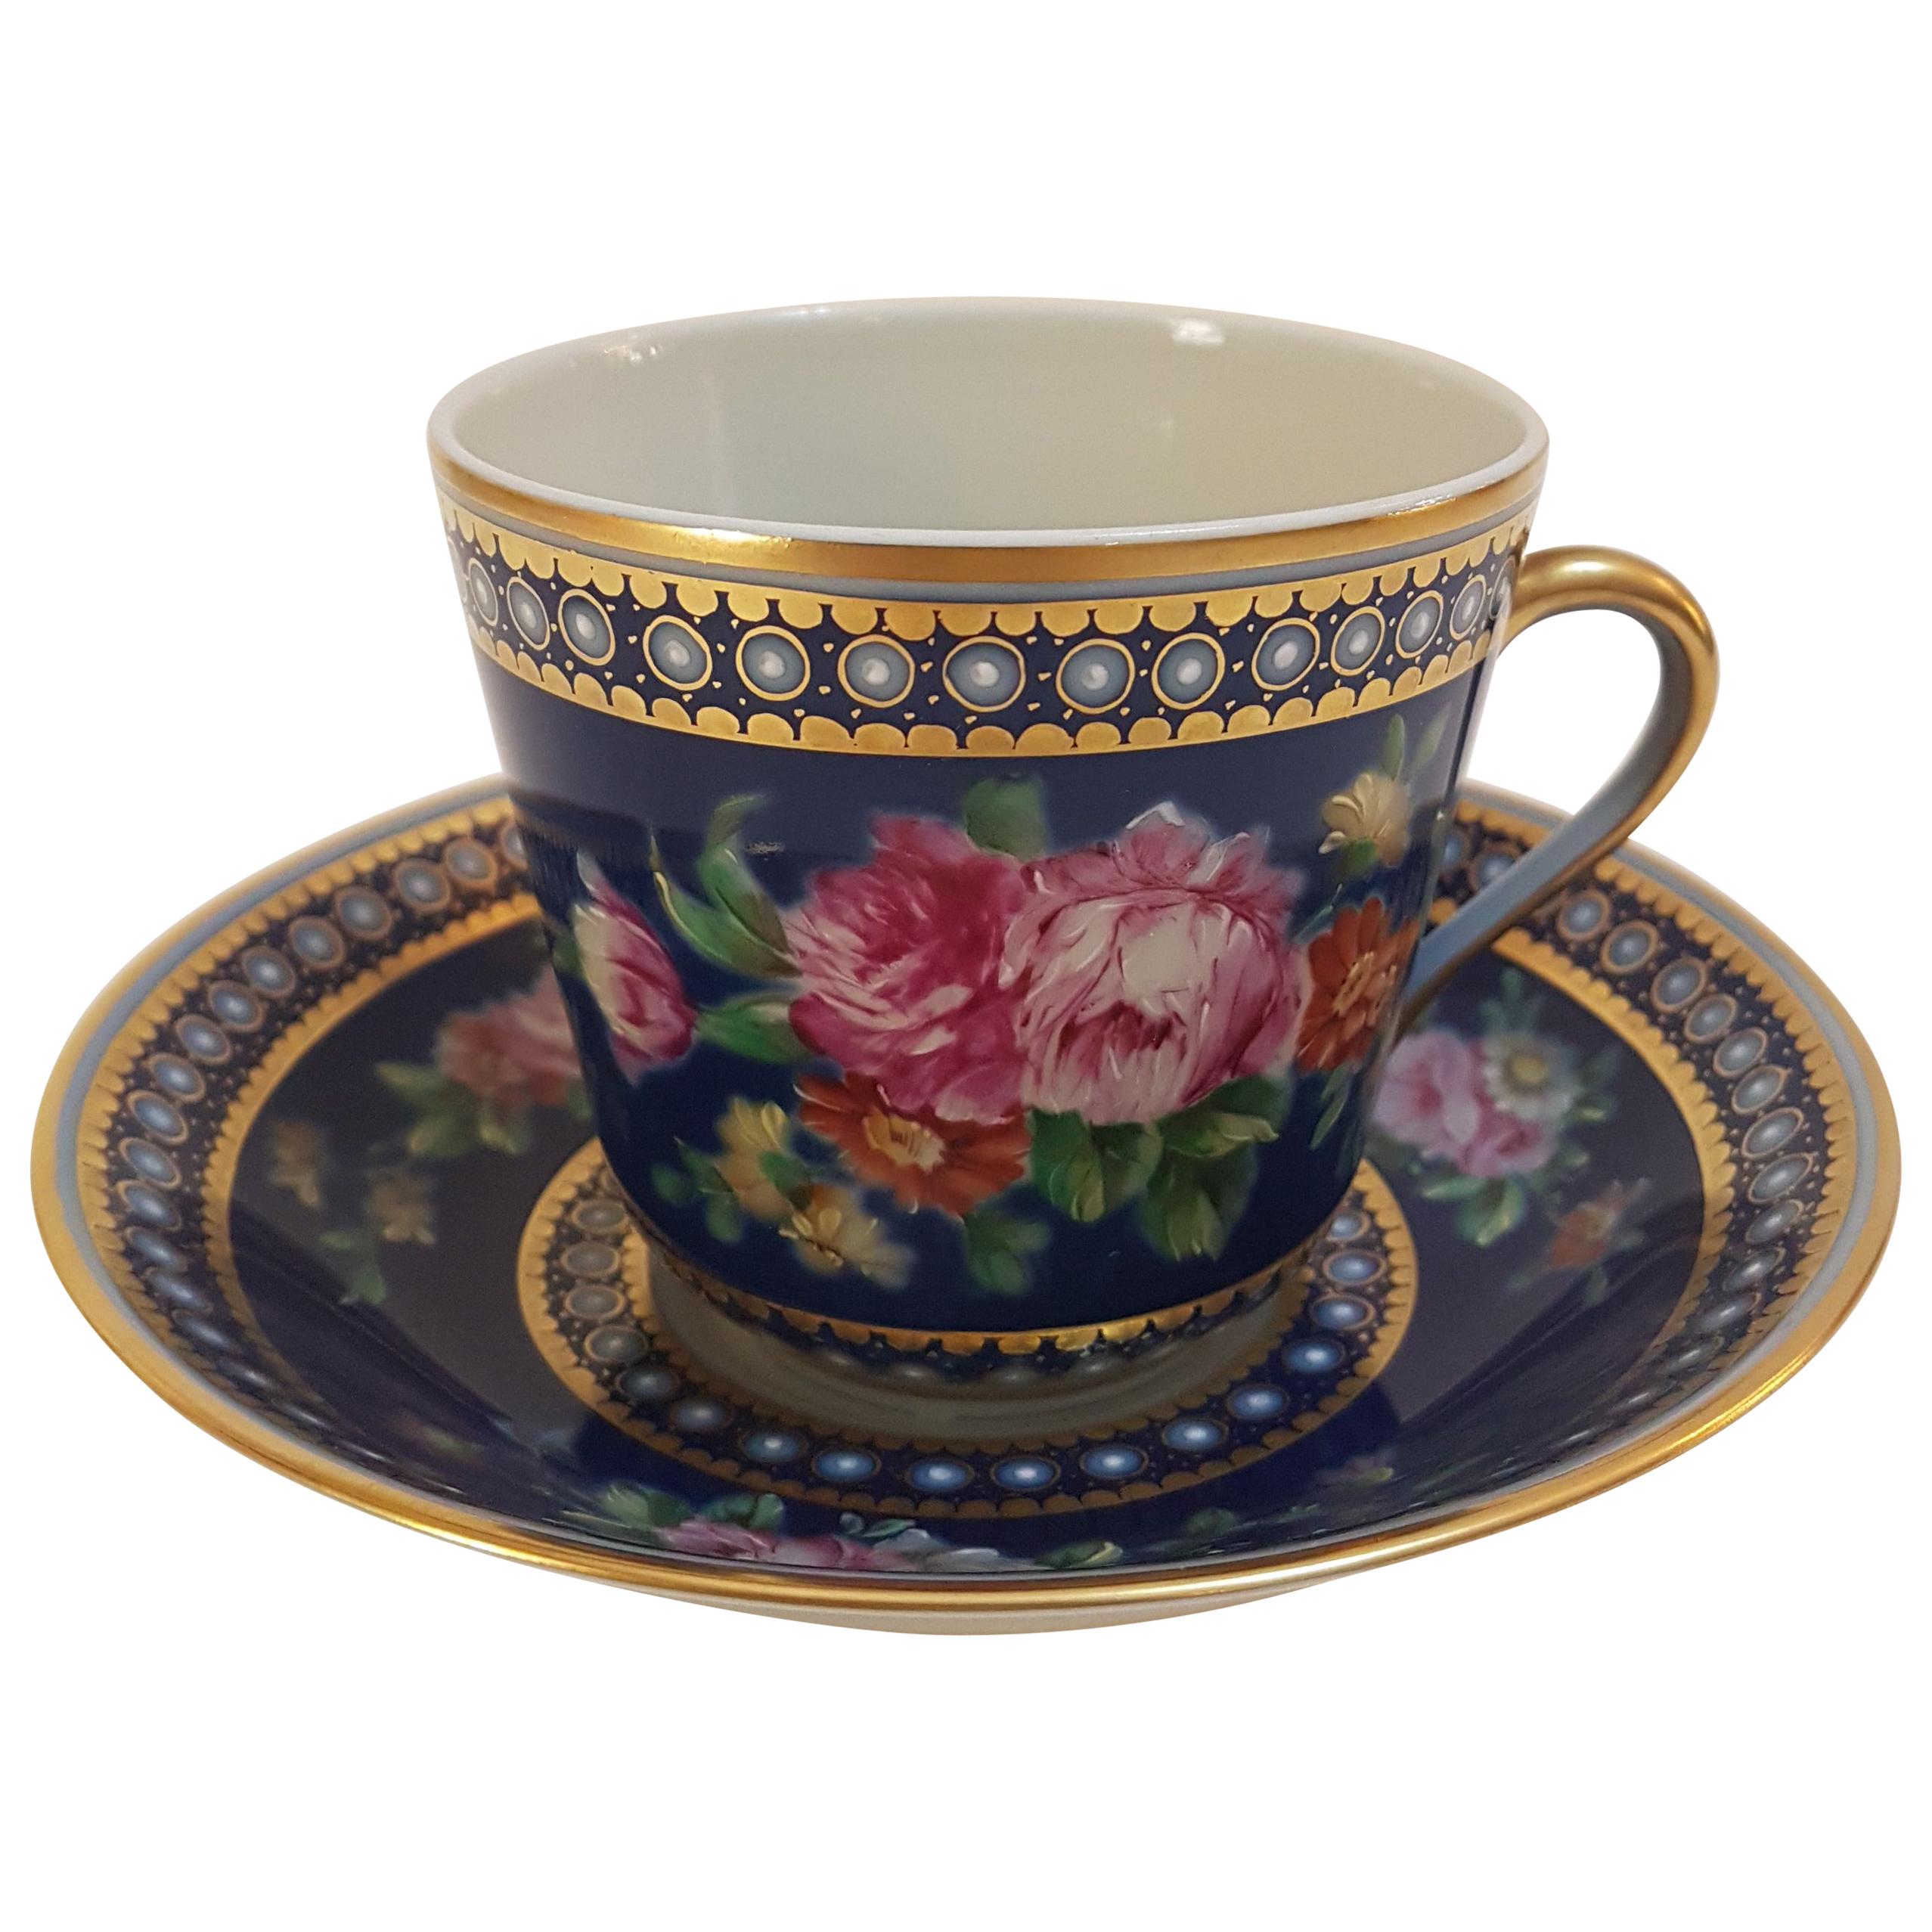 20th Century Hand Painted Vista Alegre Porcelain Collectible Tea Cup and Saucer